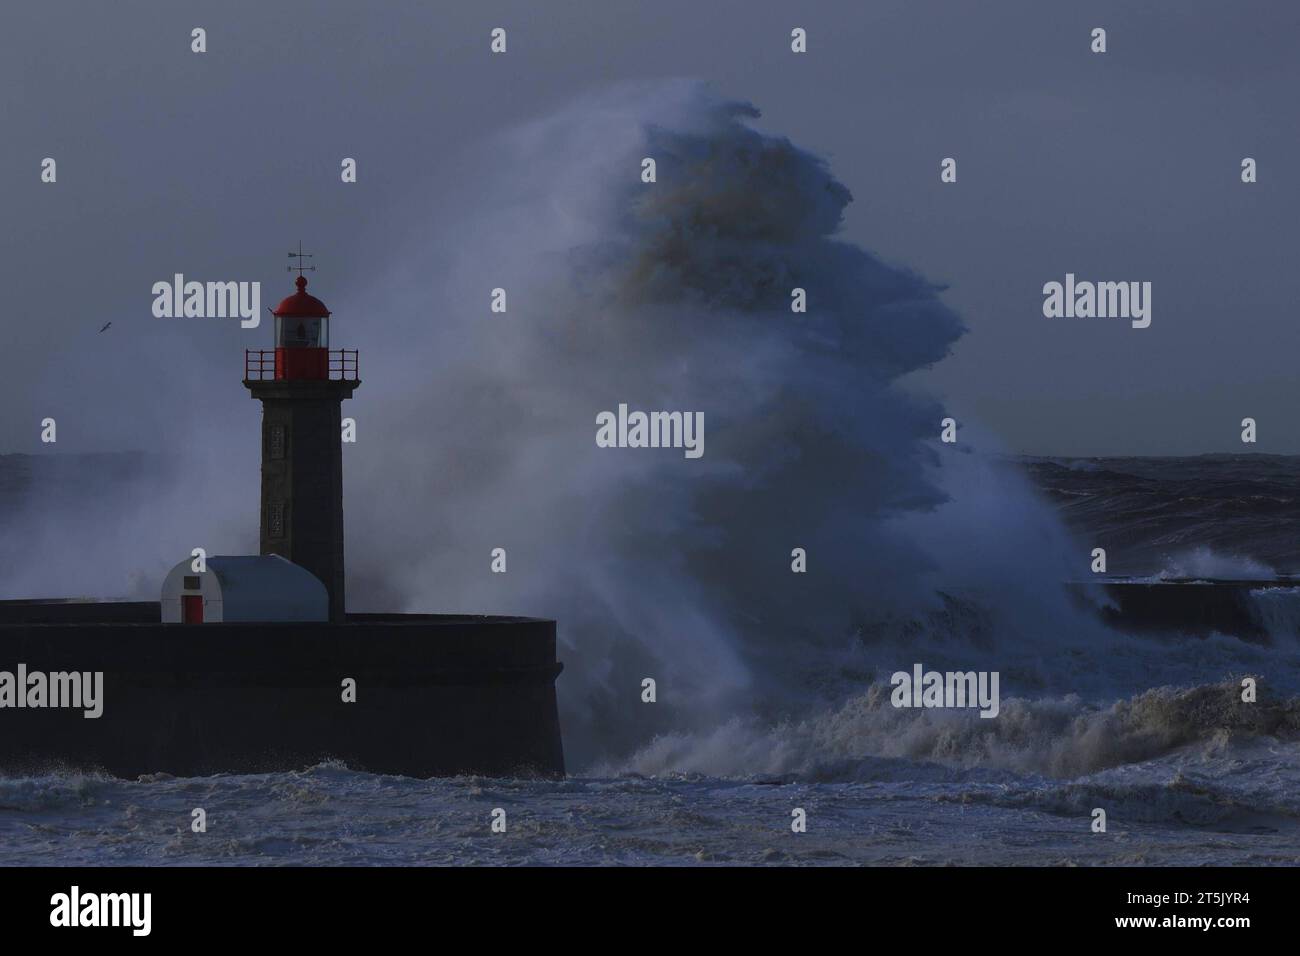 PRT - PORTUGAL/CLIMATE - INTERNATIONAL PRT - PORTUGAL/WEATHER - INTERNATIONAL - Bad weather causes strong waves in the sea at Farol de Felgueiras, located in Foz do Ouro, in Porto, Portugal, this Sunday, 05. 05/11/2023 - Photo: RAURINO MONTEIRO/ATO PRESS/ STATE CONTENT PRT - PORTUGAL/CLIMATE - INTERNATIONAL Harbor Copyright: xRaurinoxMonteirox Credit: Imago/Alamy Live News Stock Photo